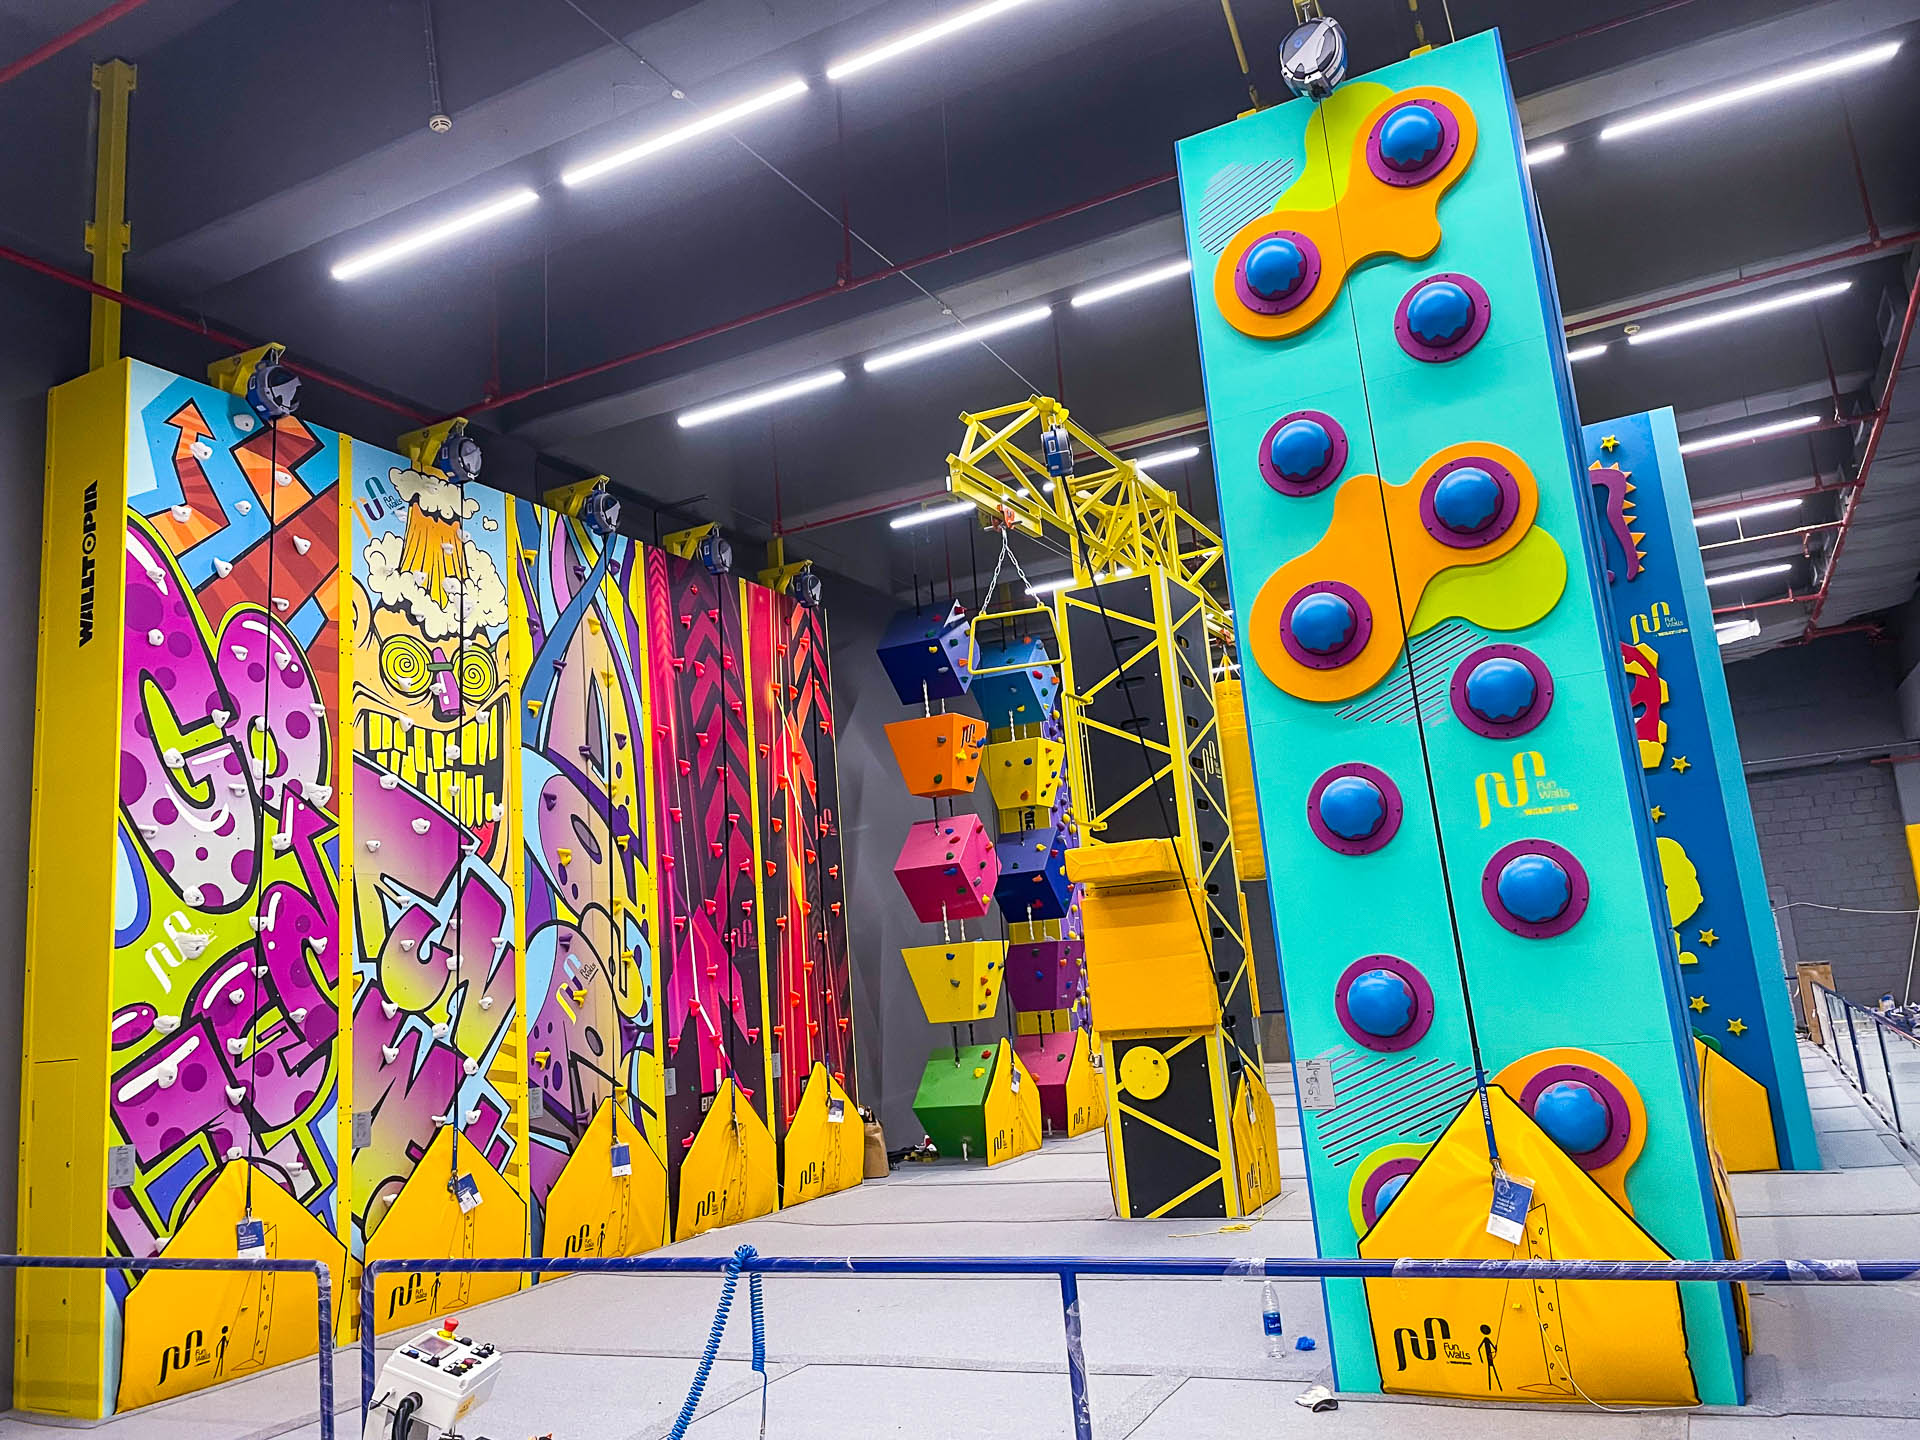 Walltopia Net Maze, Adventure Train, Ropes Course, Rollglider, Fun Walls and Cloud Climb in Nomad Entertainment, Kuwait. Active entertainment Fun climbs in a shopping center